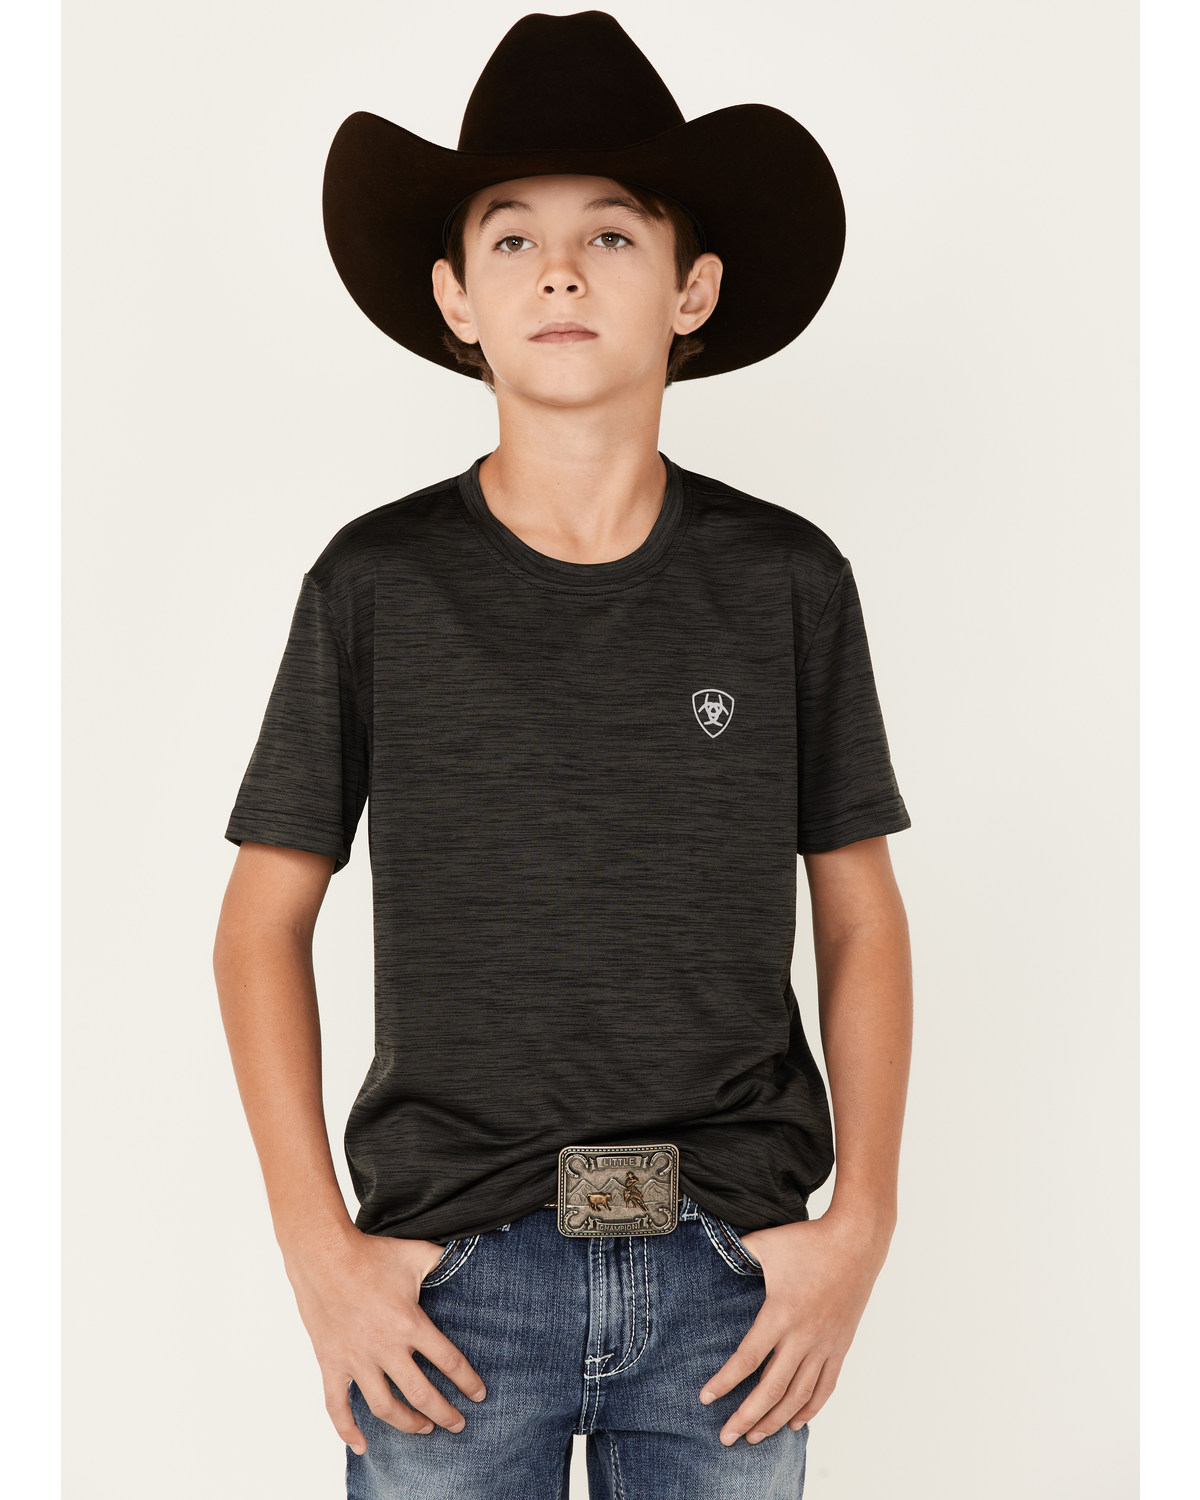 Ariat Boys' Charger Vertical Flag Graphic Short Sleeve T-Shirt